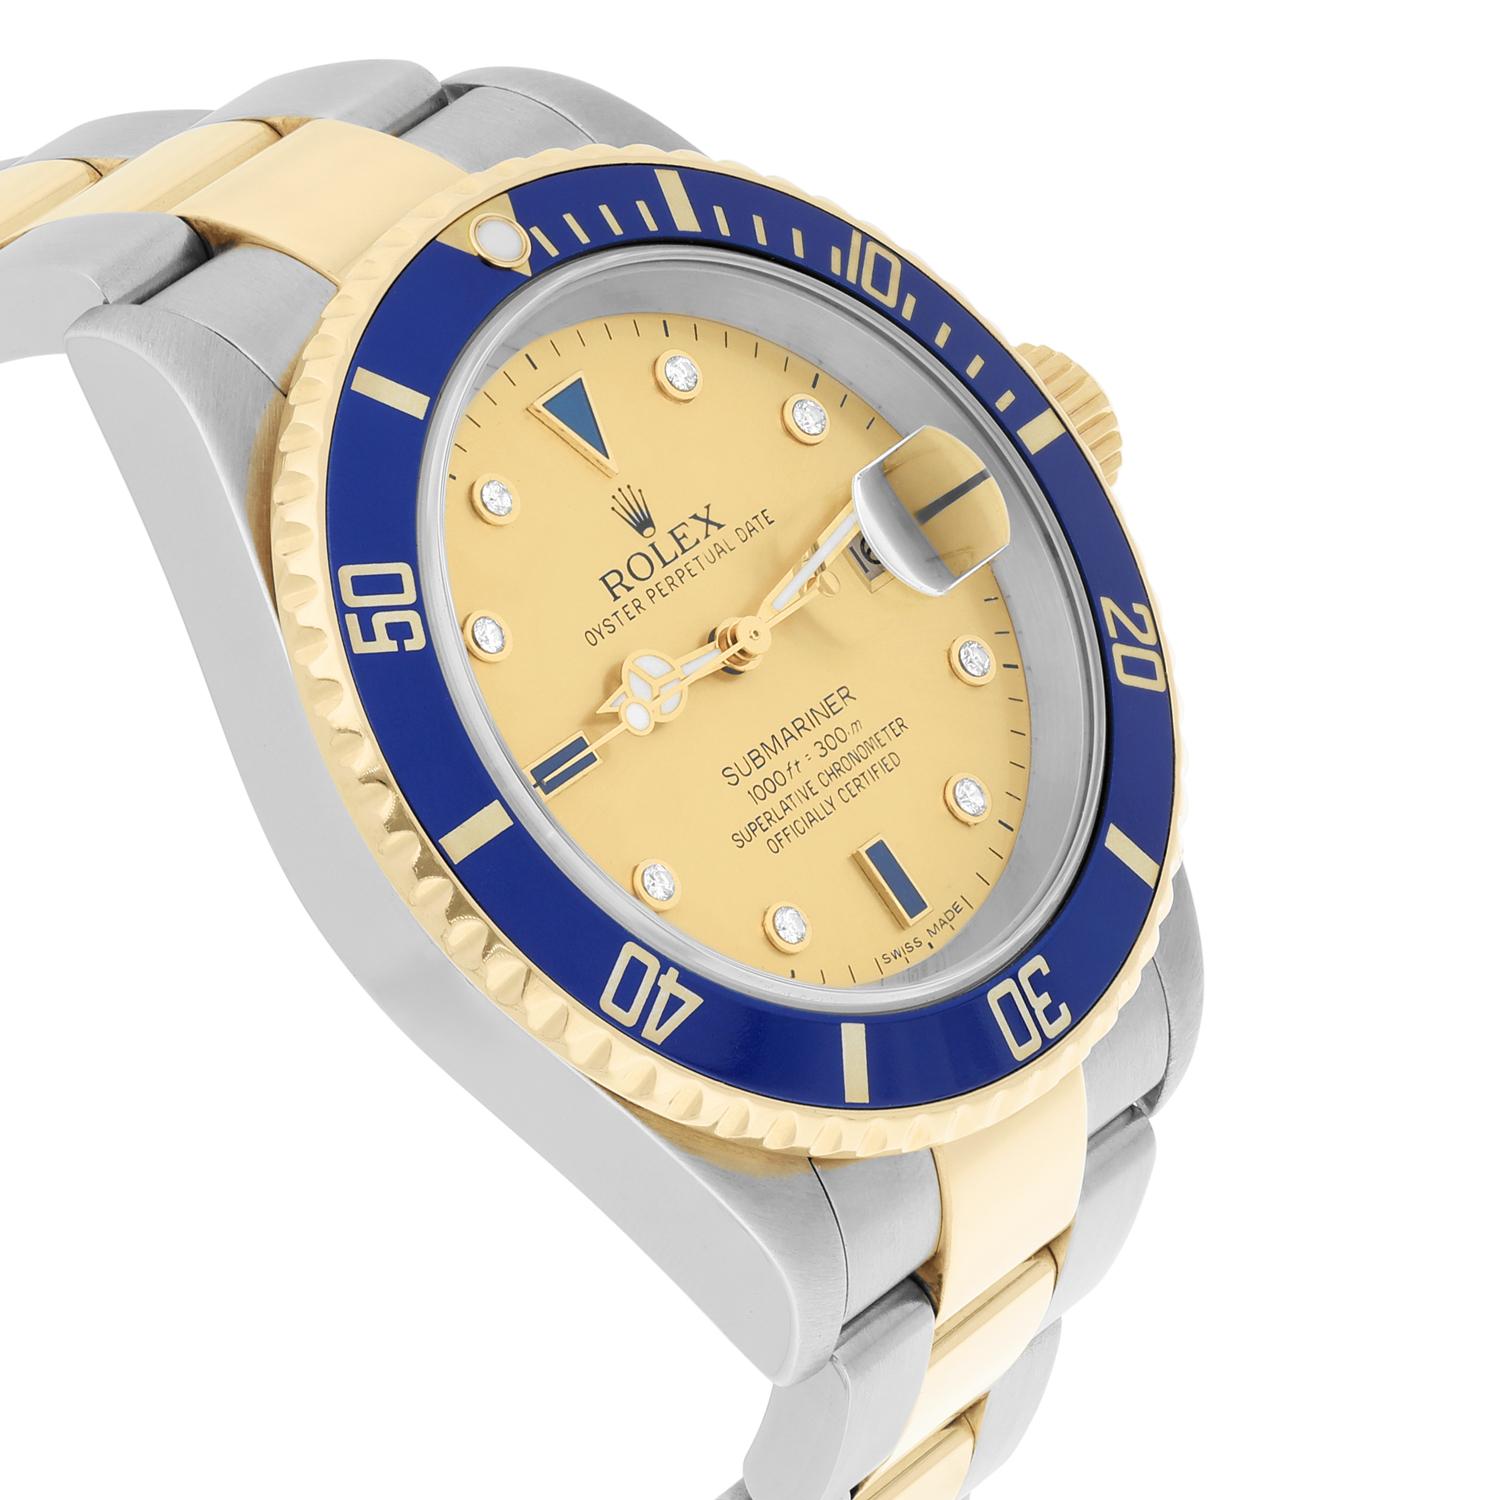 Rolex Submariner Date Yellow Gold/Steel Serti Gold Diamond Dial Watch 16613 For Sale 1